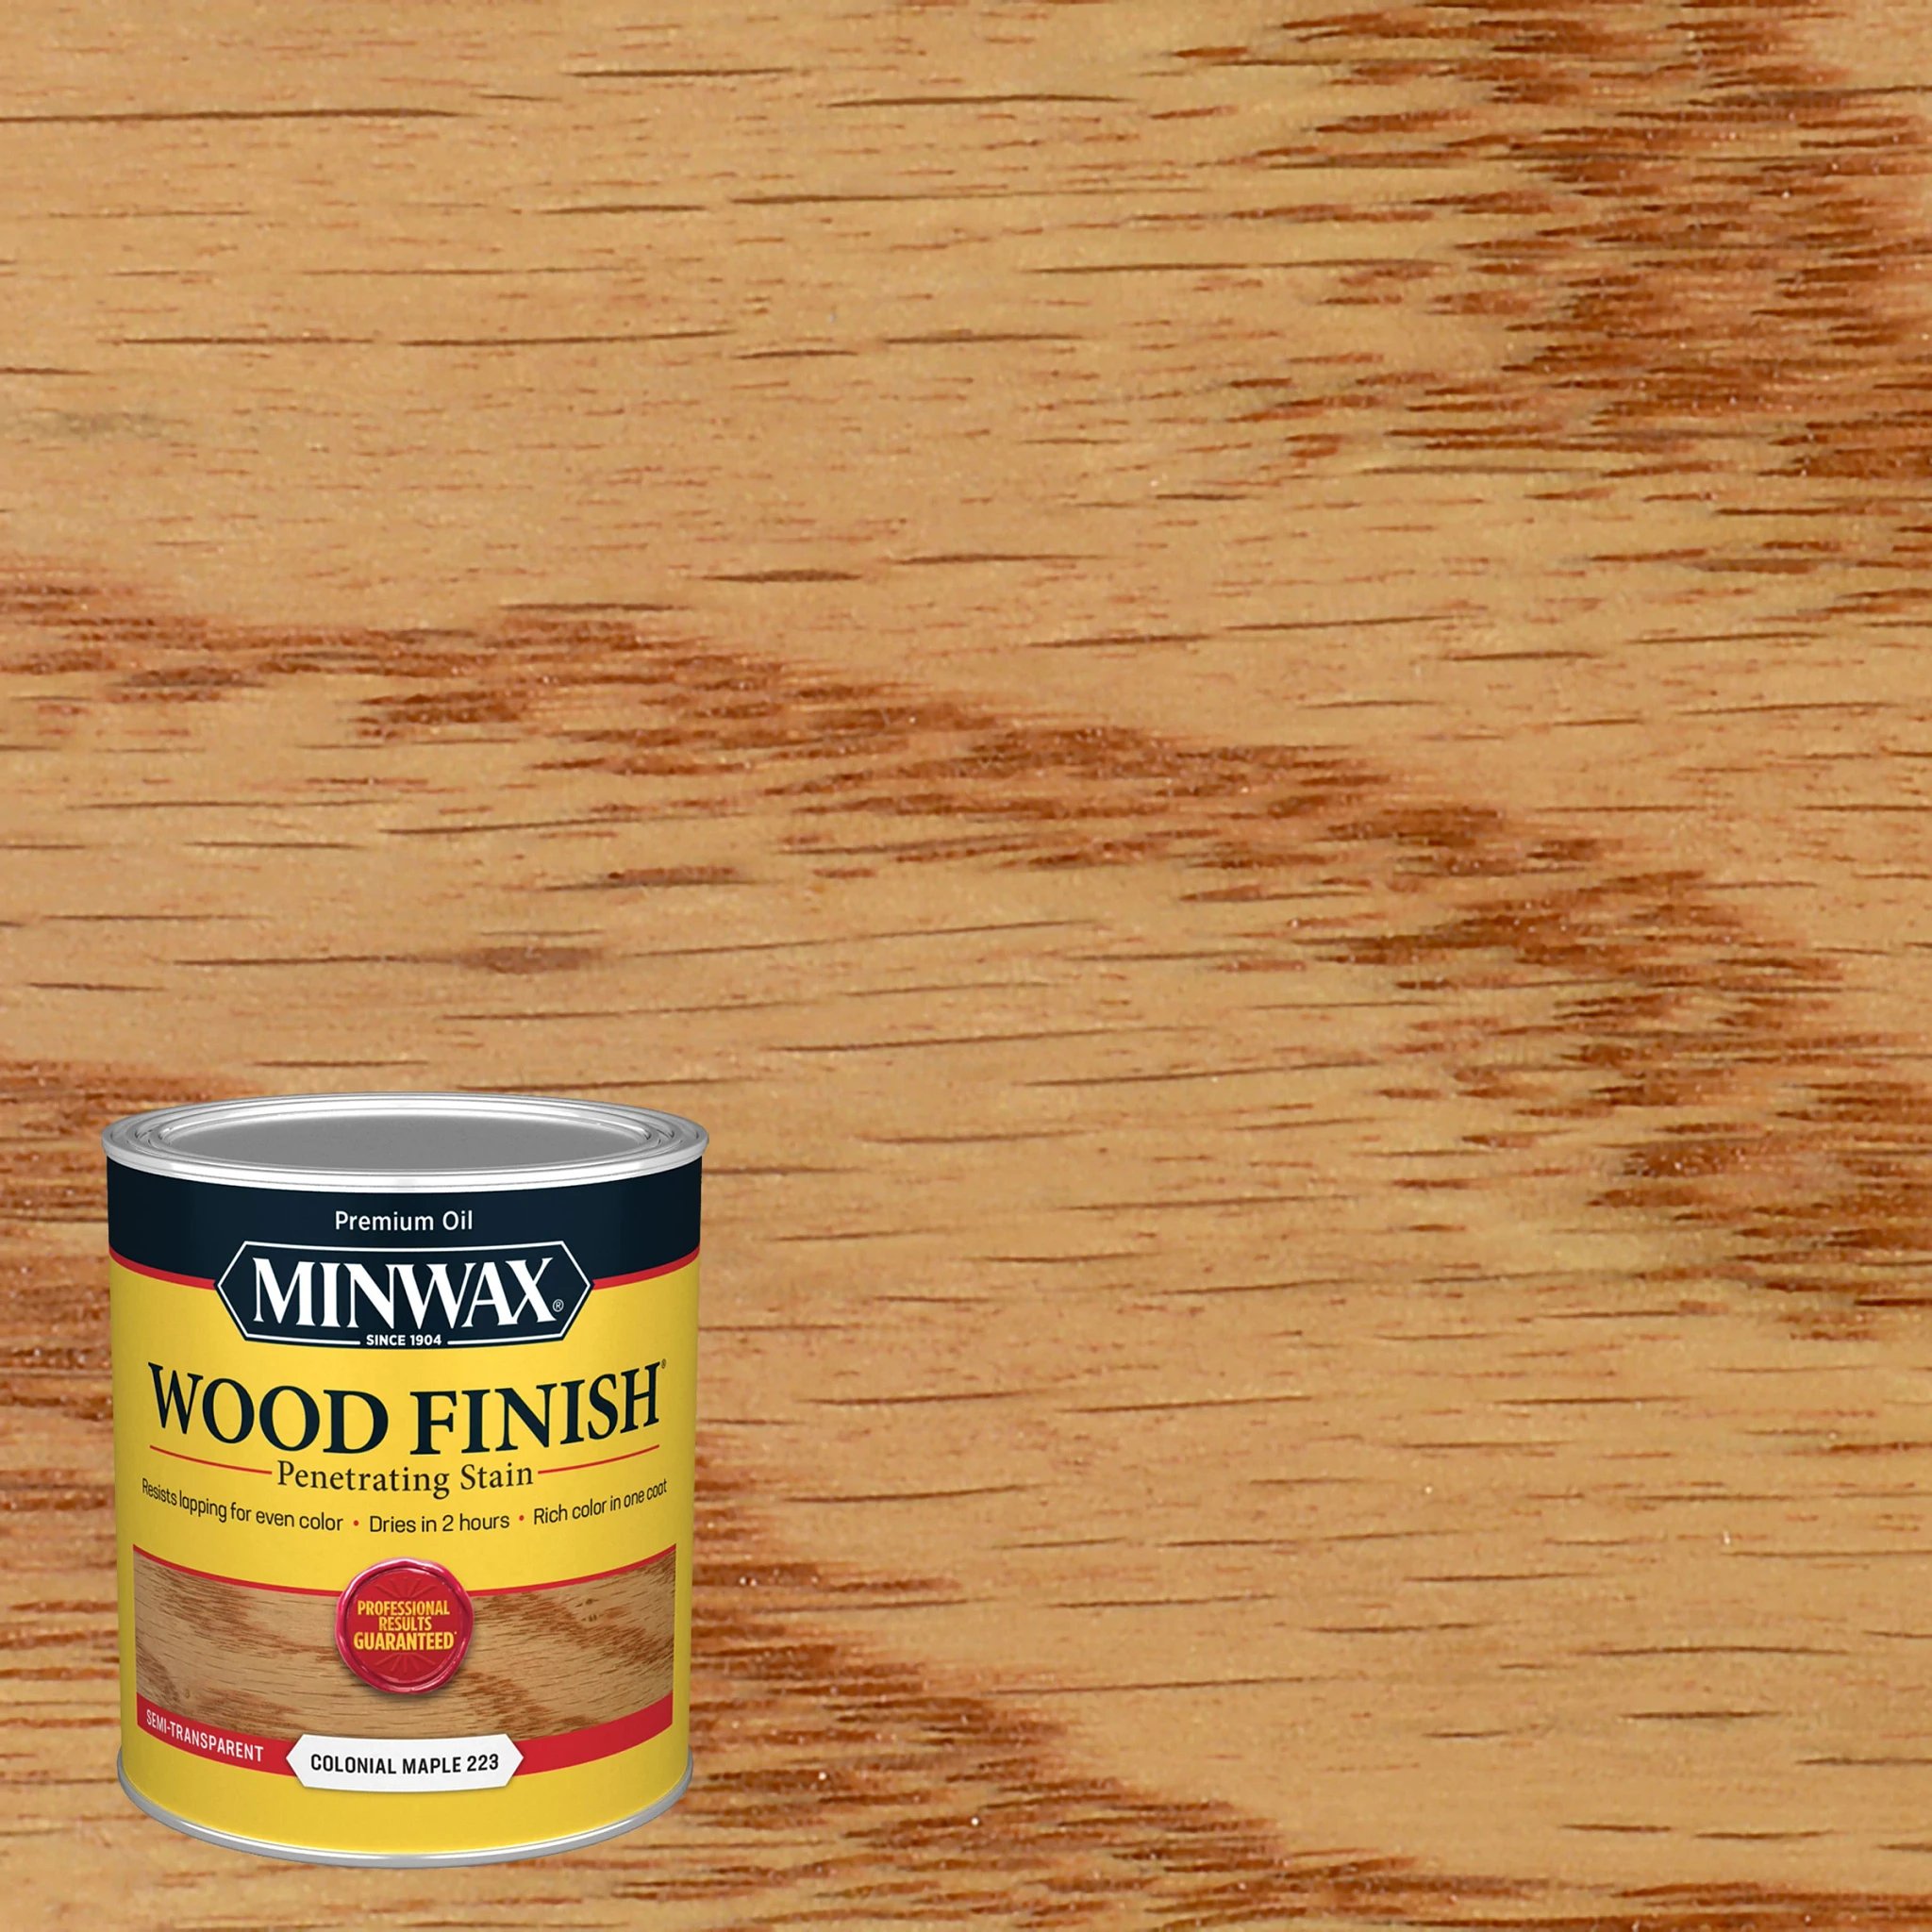 Wood Finish Oil Based InteriorWoodStain COLONIAL MAPLE